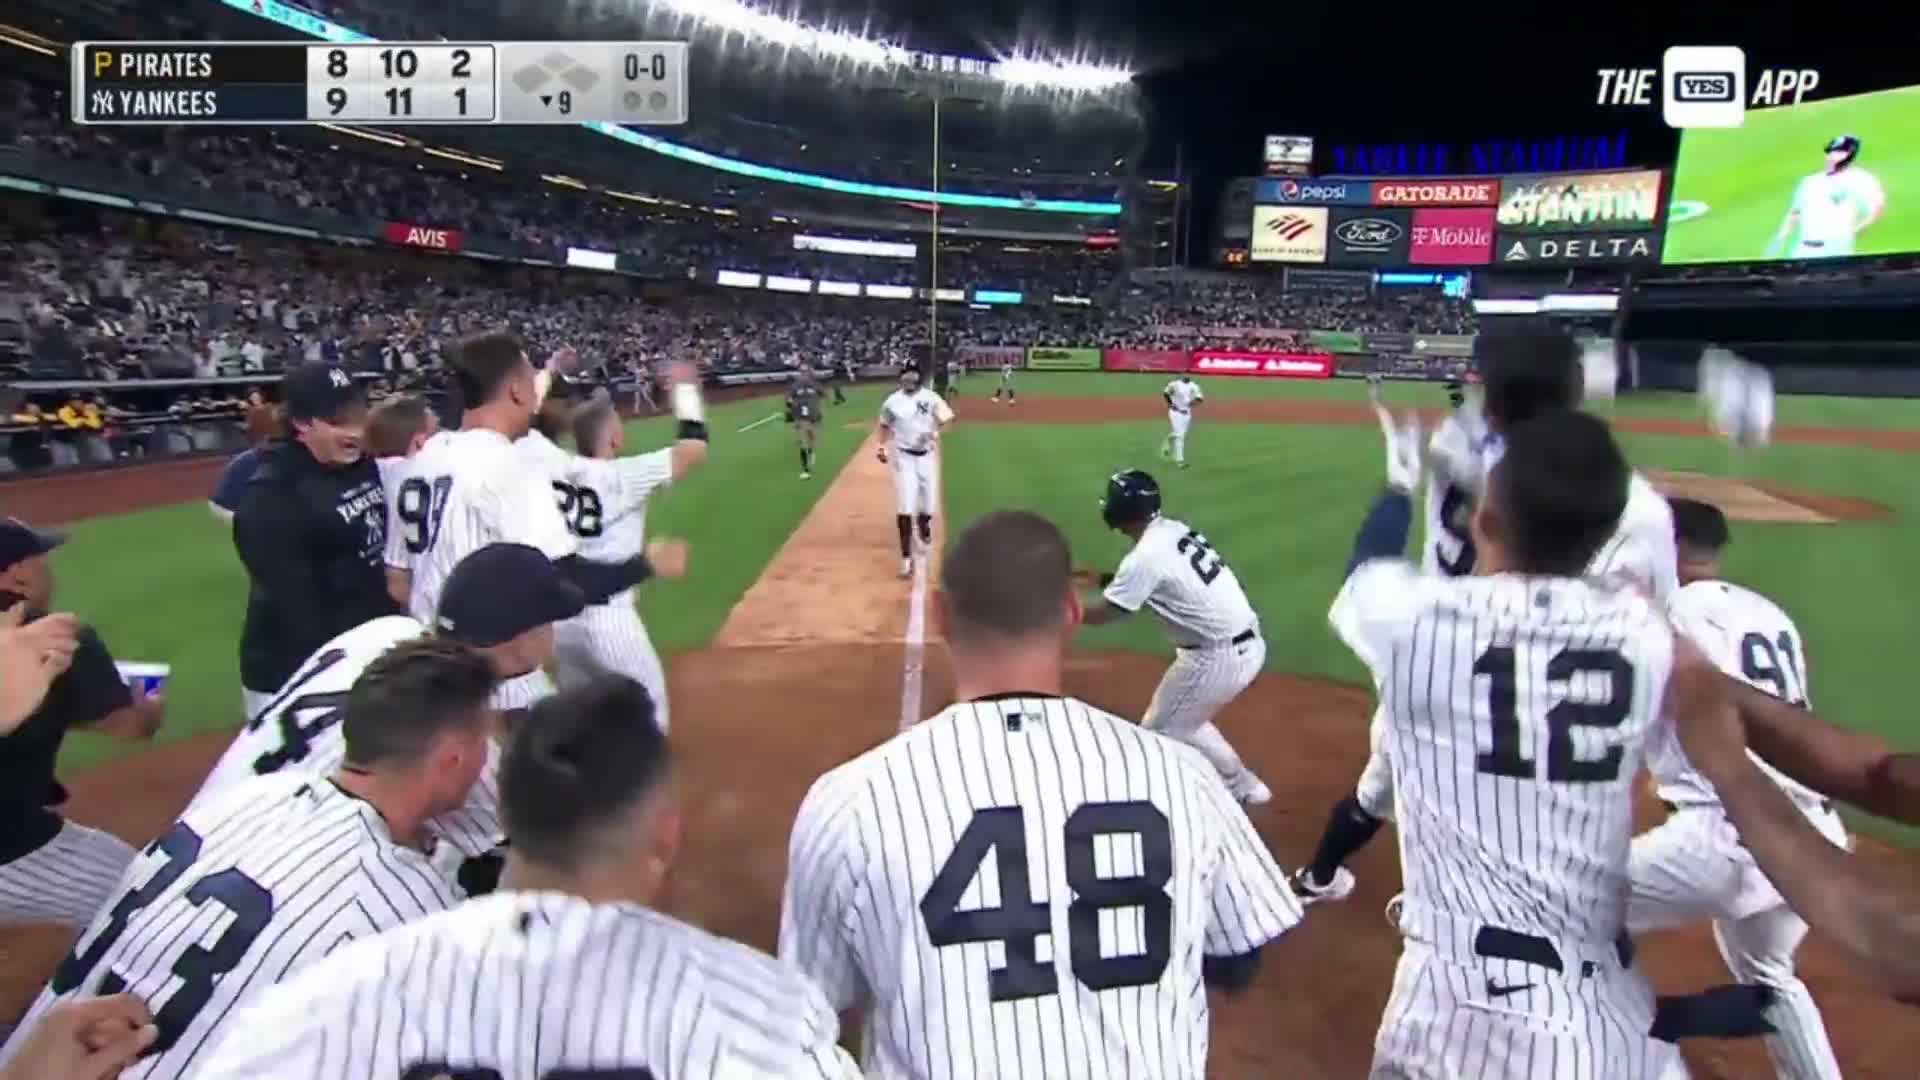 Giancarlo Stanton hits a walk off grand slam as the Yankees defeat